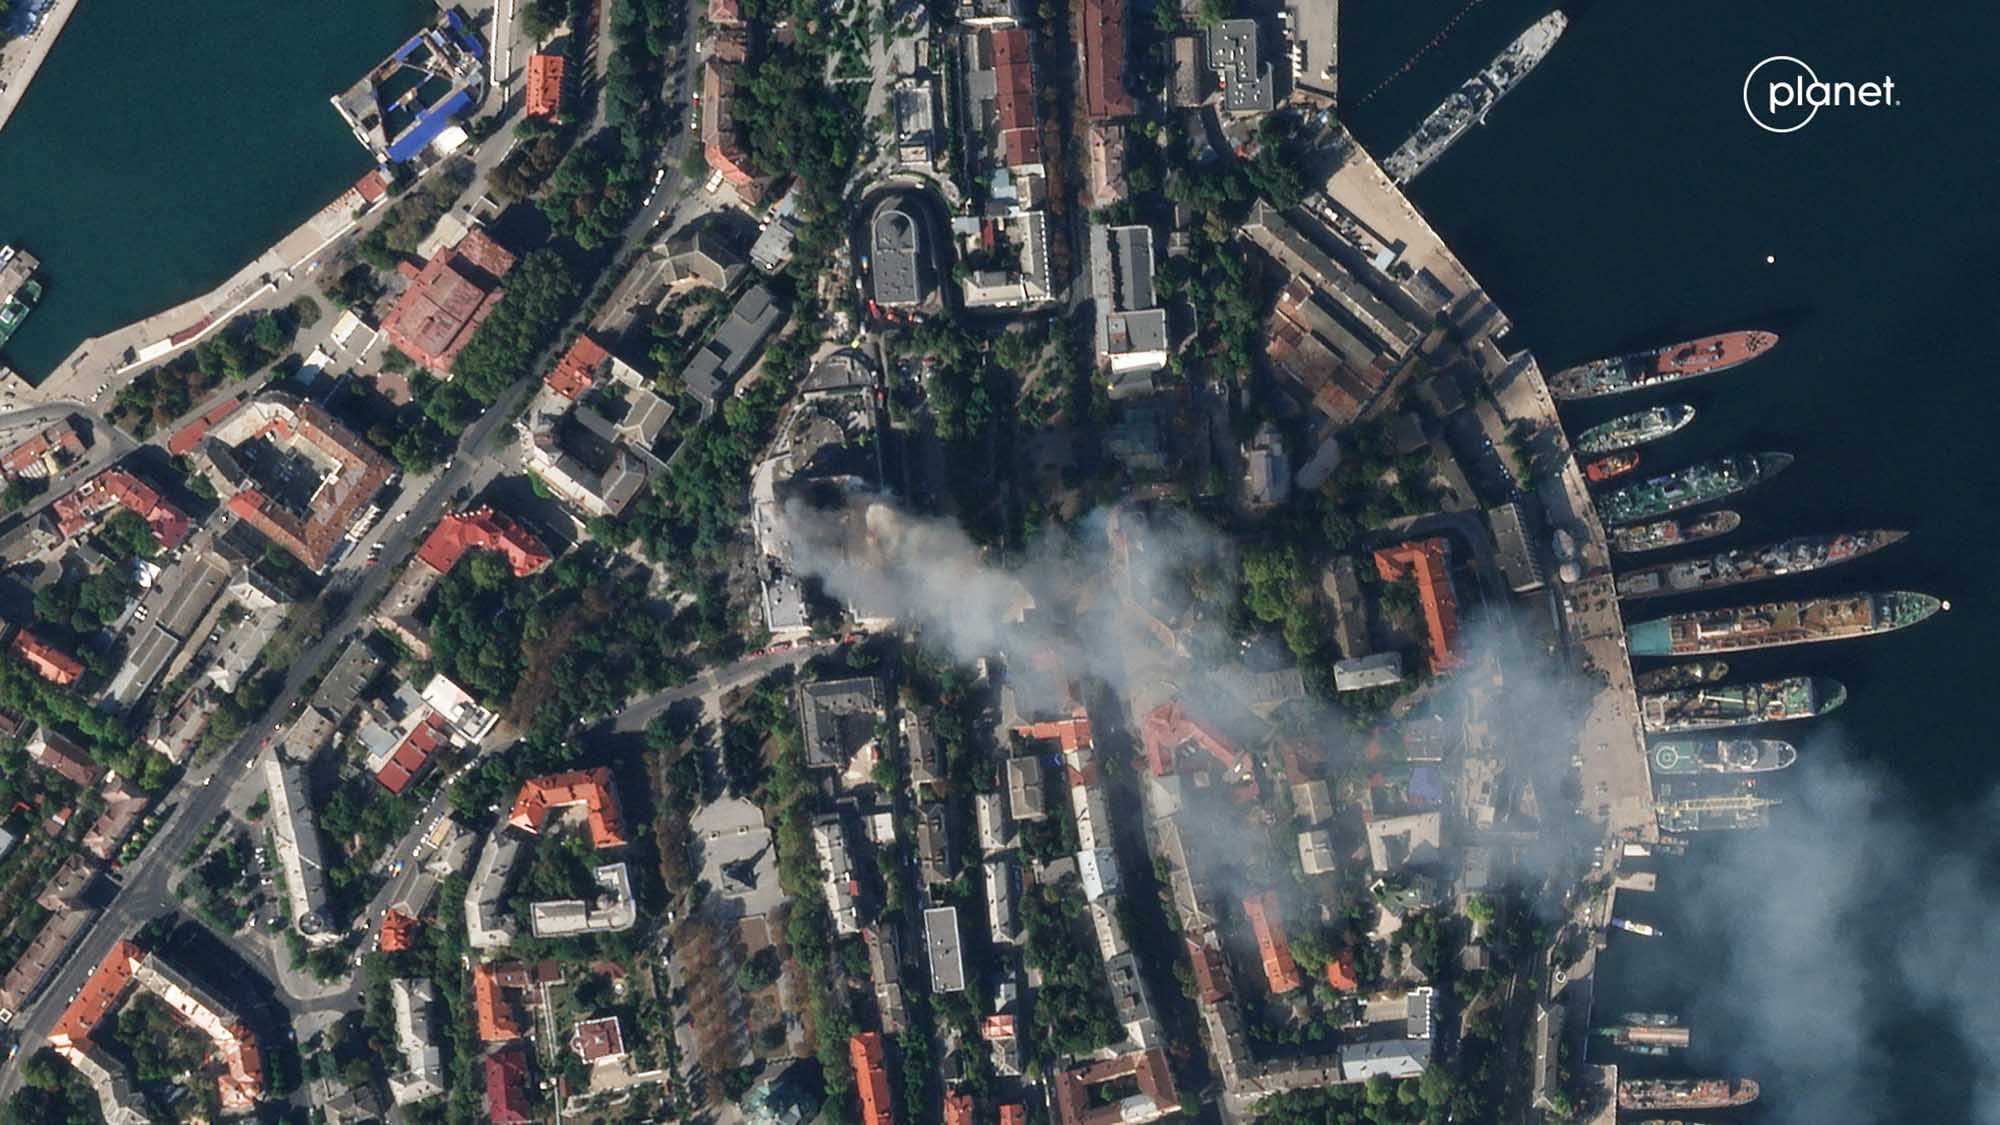 A satellite image shows smoke billowing from a Russian Black Sea Navy headquarters after a missile strike in Sevastopol, Crimea, on September 22.